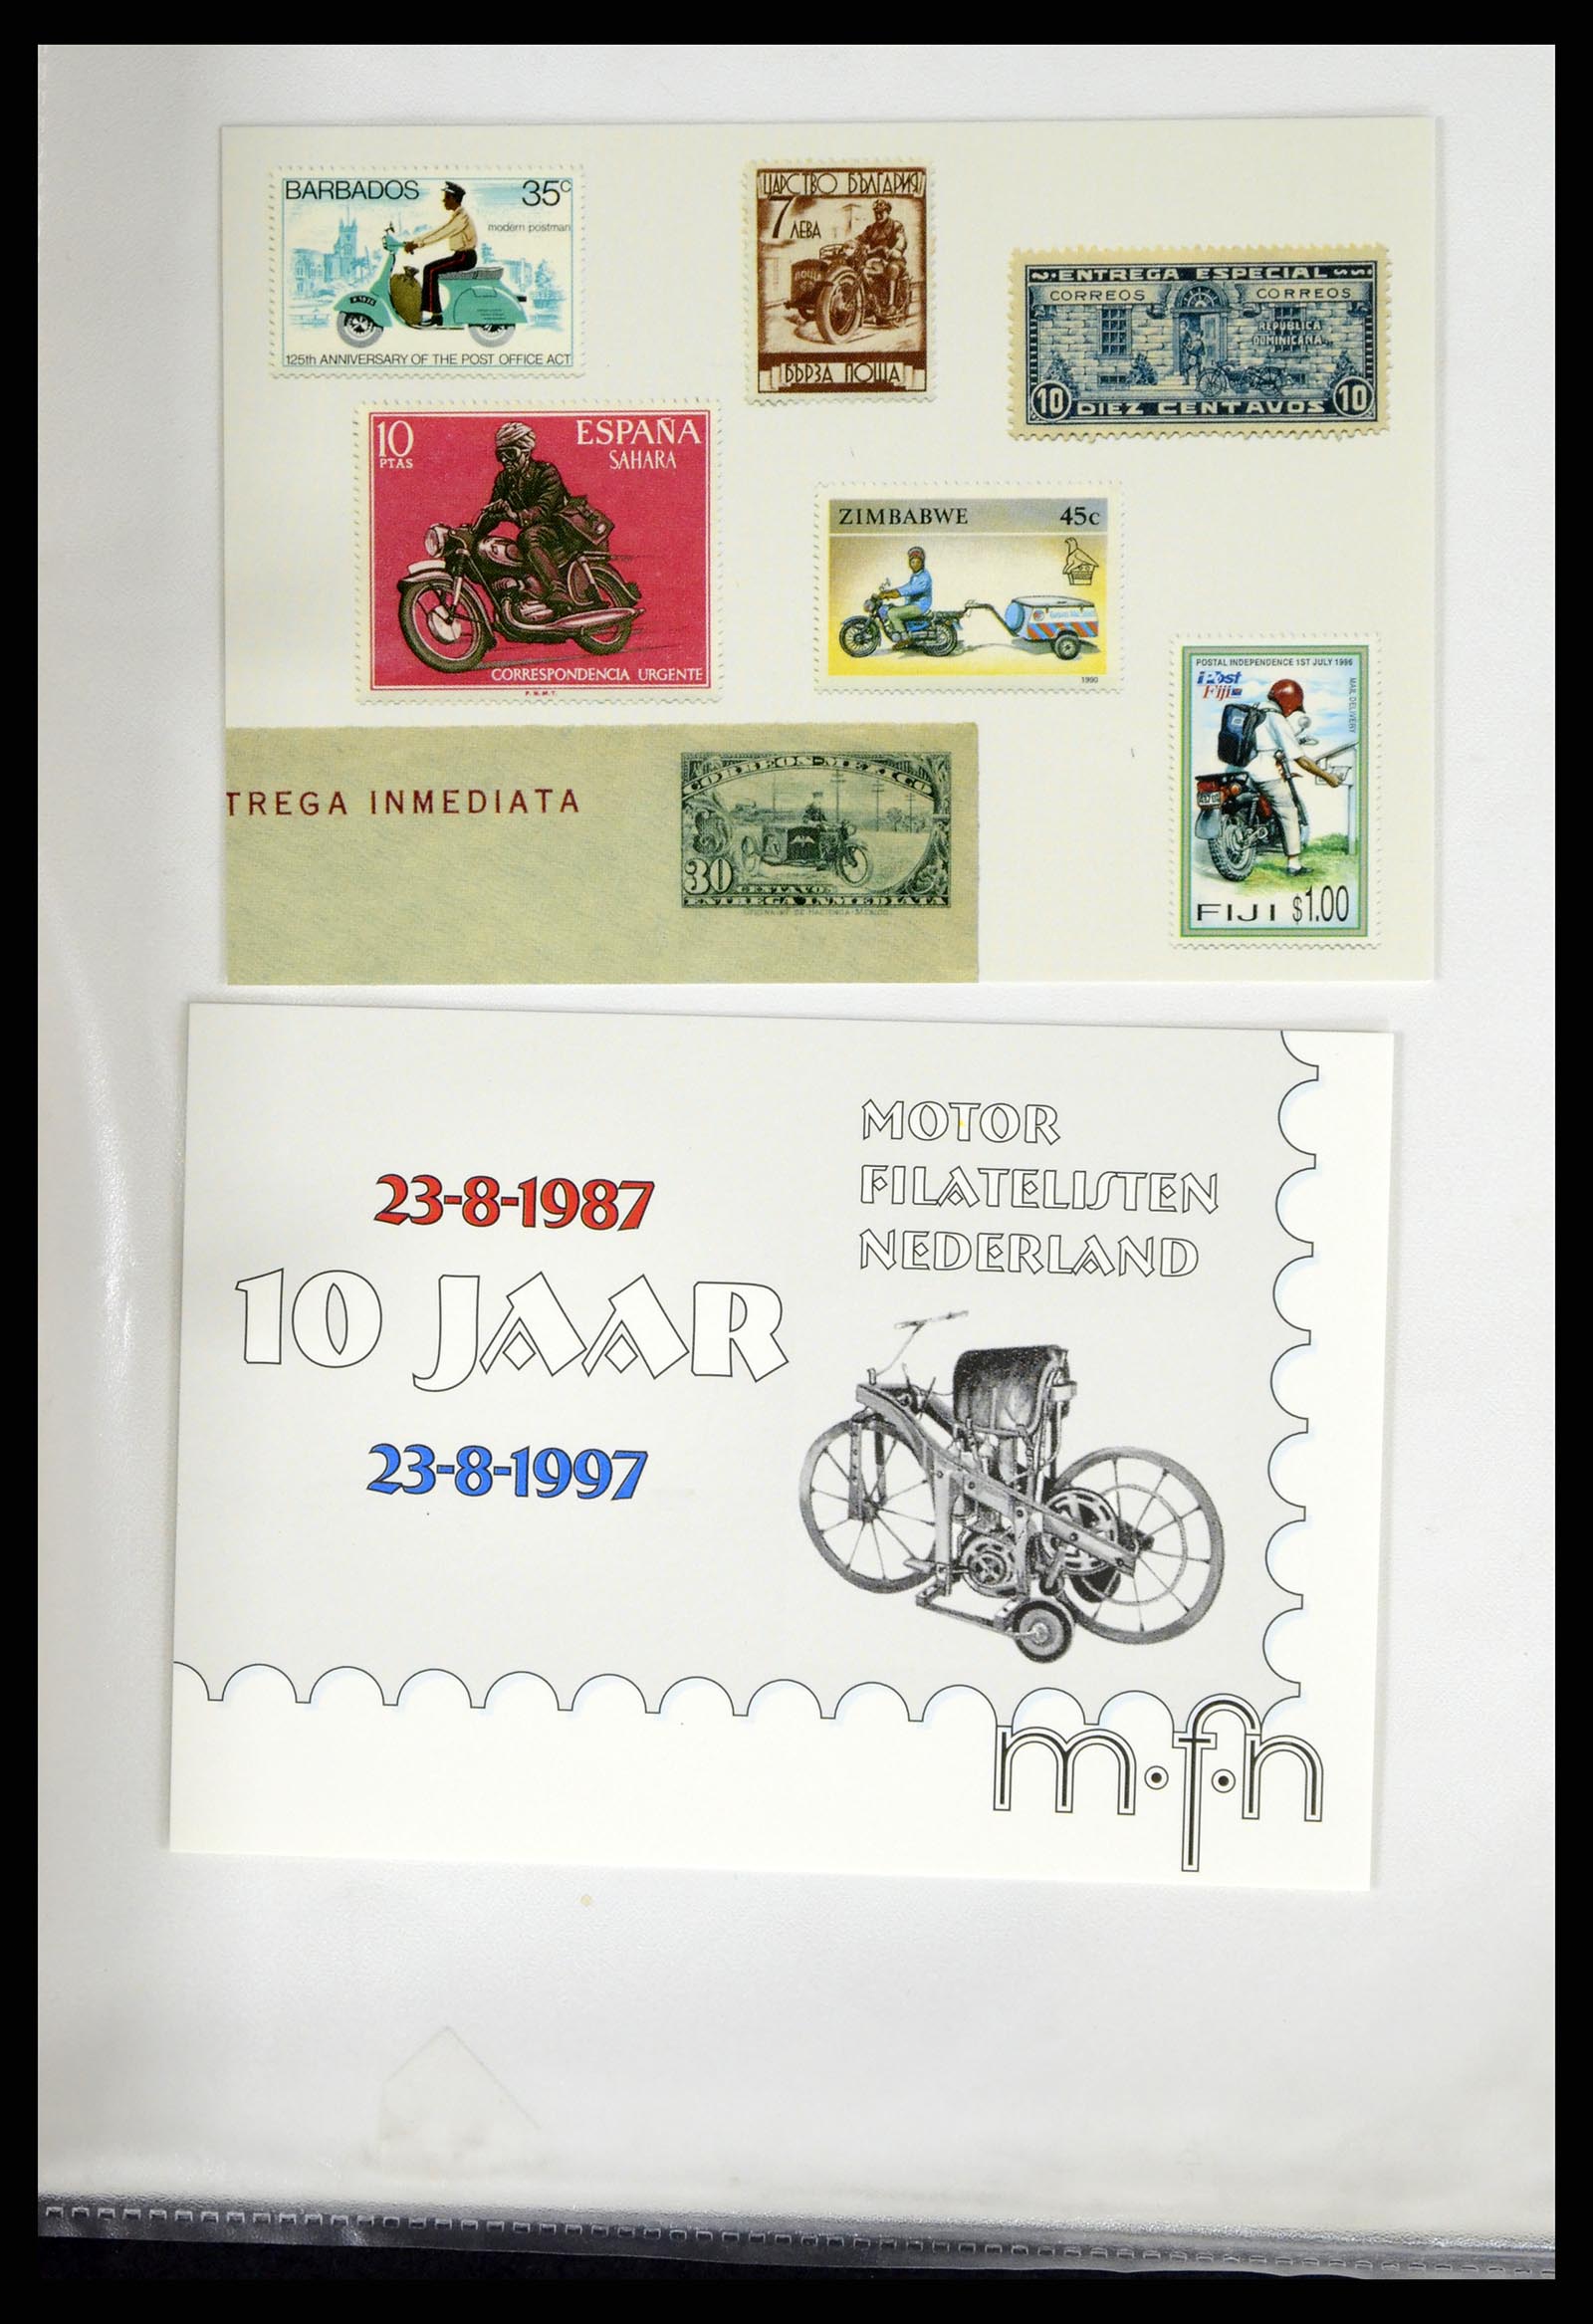 37462 326 - Stamp collection 37462 Thematics Motorcycles 1922-2000.